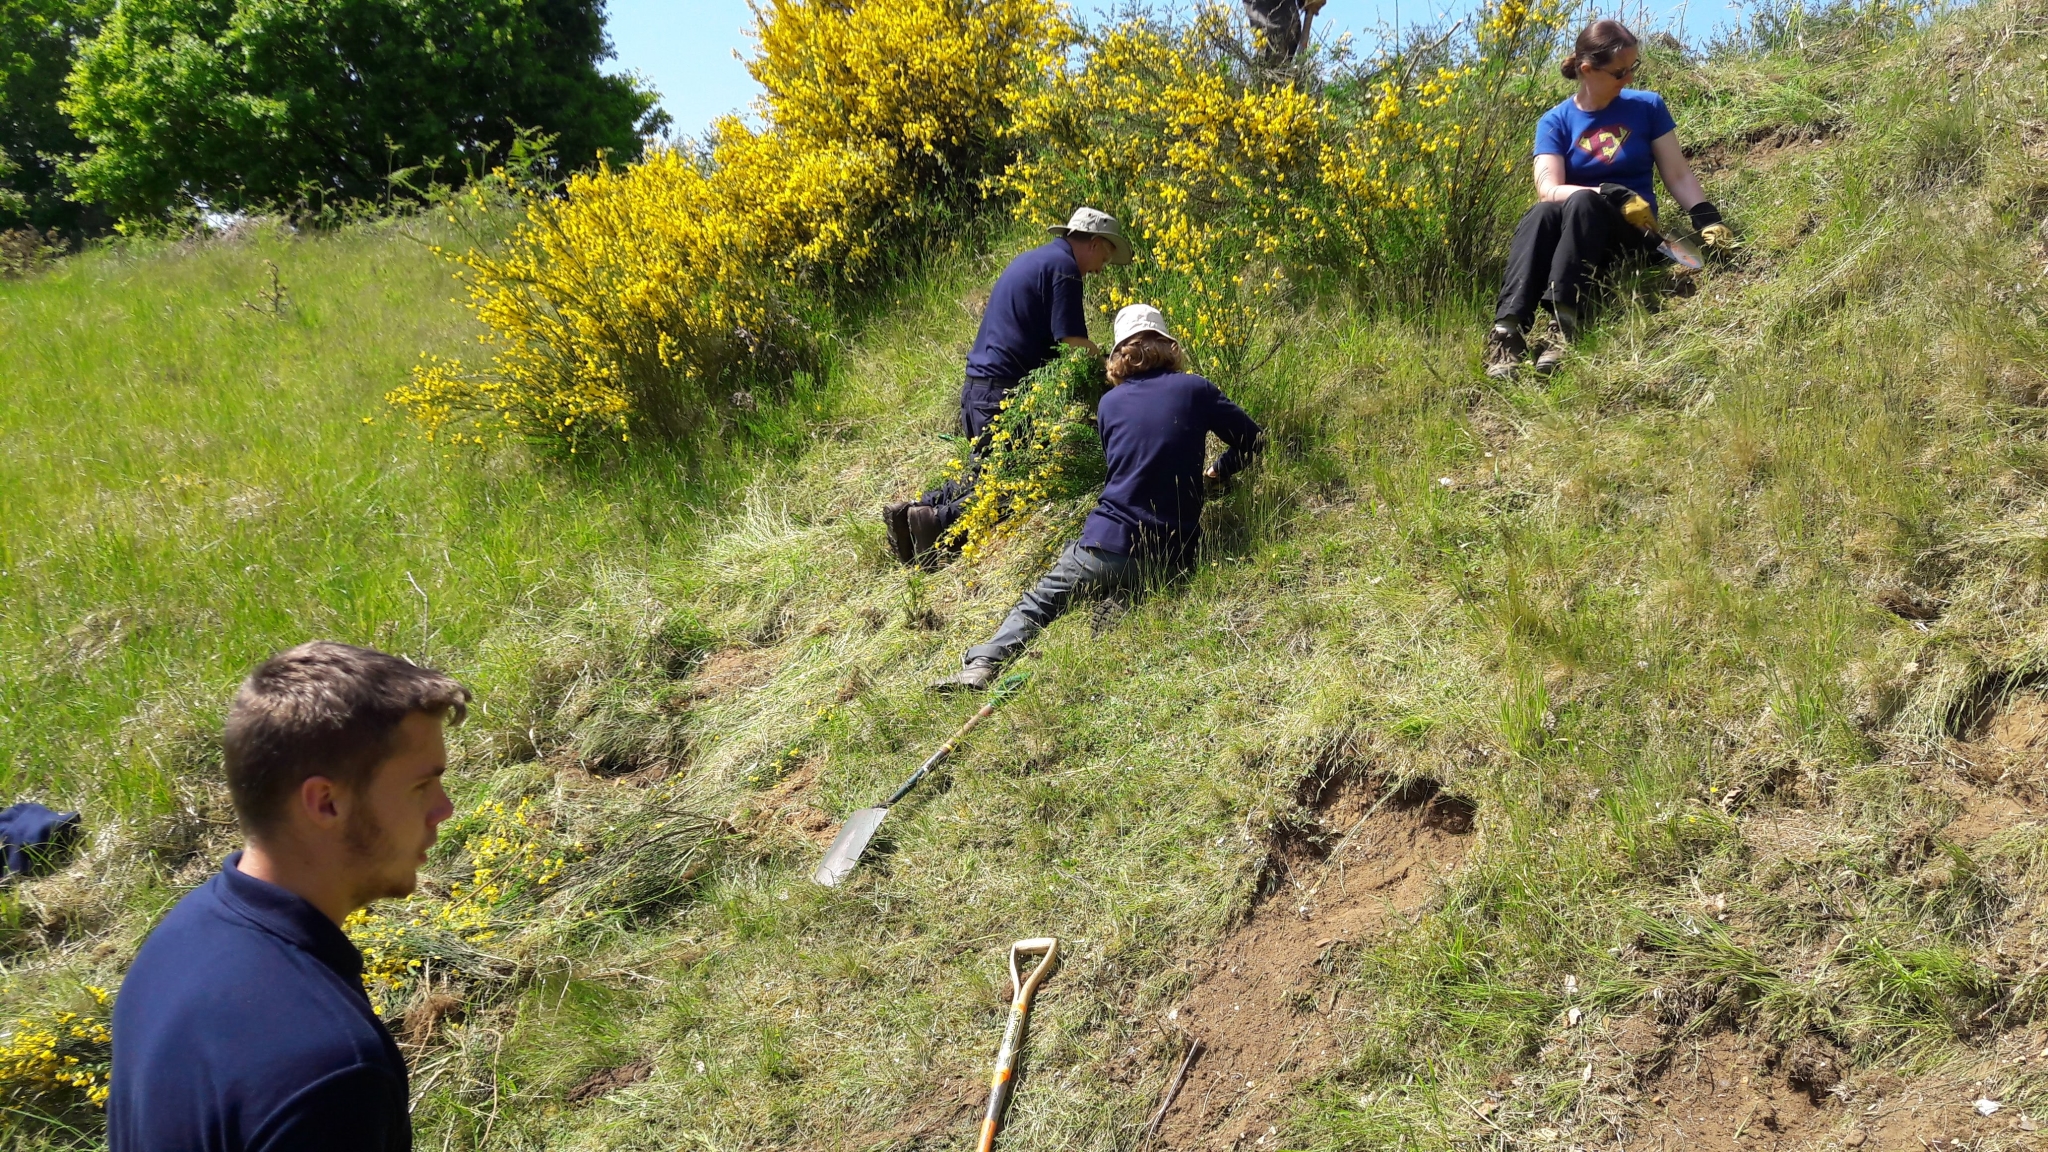 A photo from the FoTF Conservation Event - May 2018 - Open Day preparations at Mildenhall Mugwort Pits & Mildenhall Warren Lodge : Volunteers work on one of the slopes of the Mugworts pits